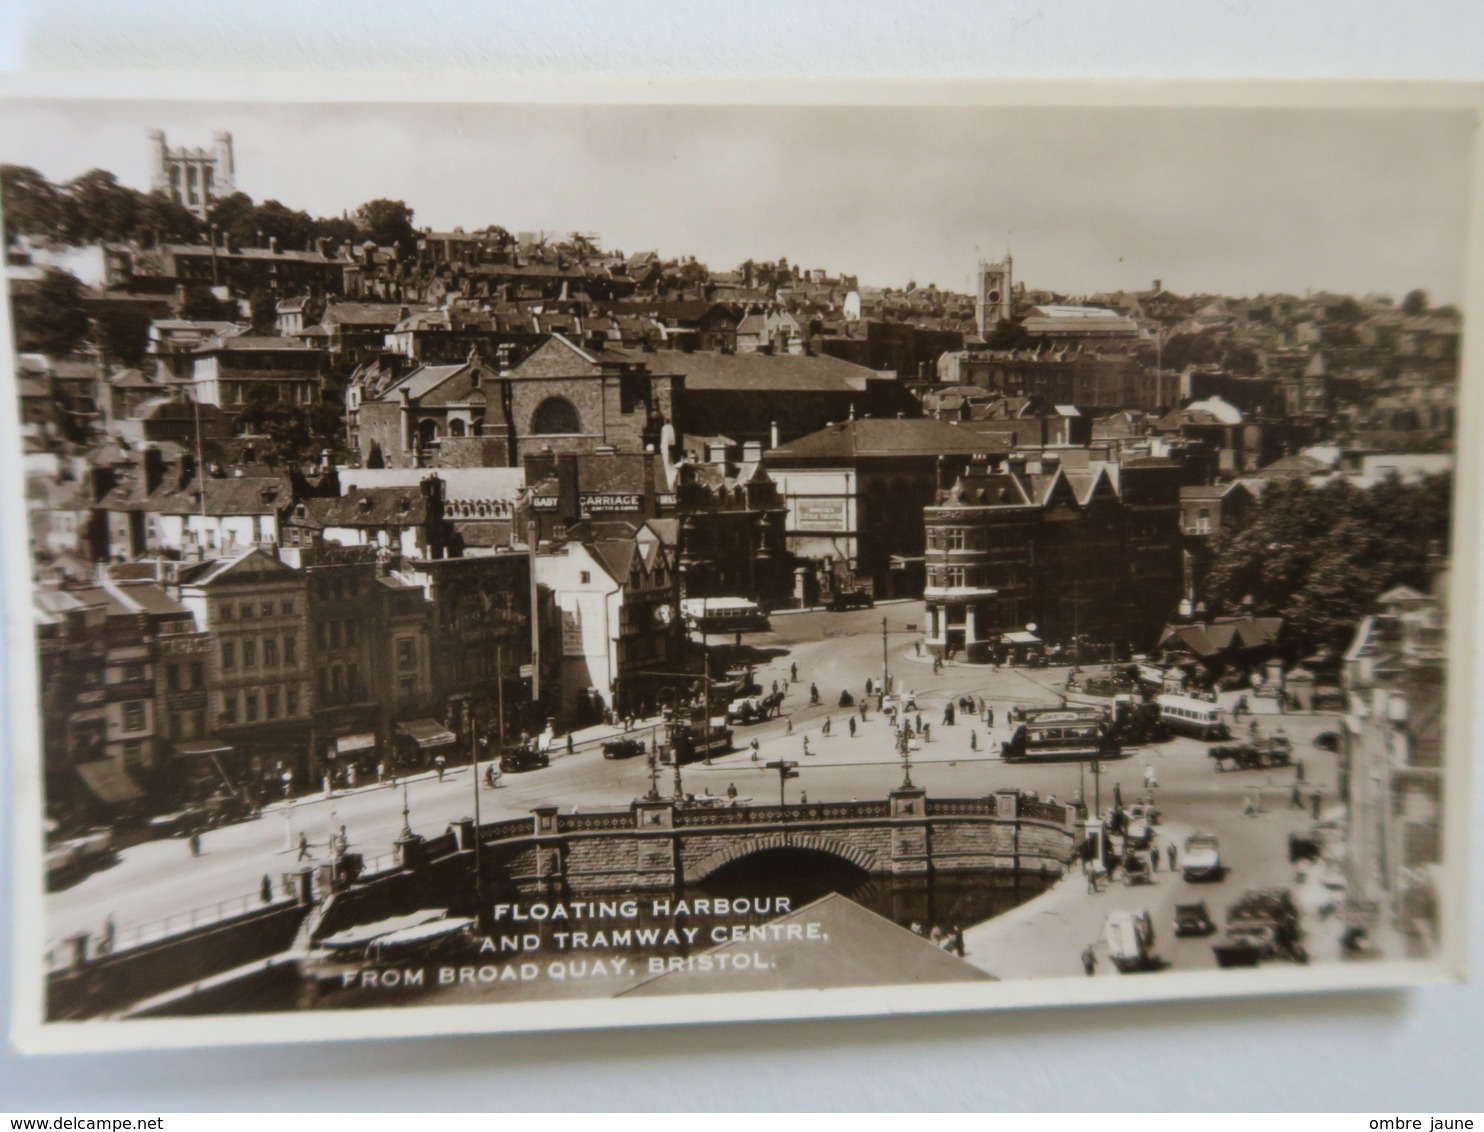 TT - Royaume Uni - BRISTOL - FLOATING HARBOUR AND TRAMWAY CENTRE FROM BROAD QUAY - Bristol